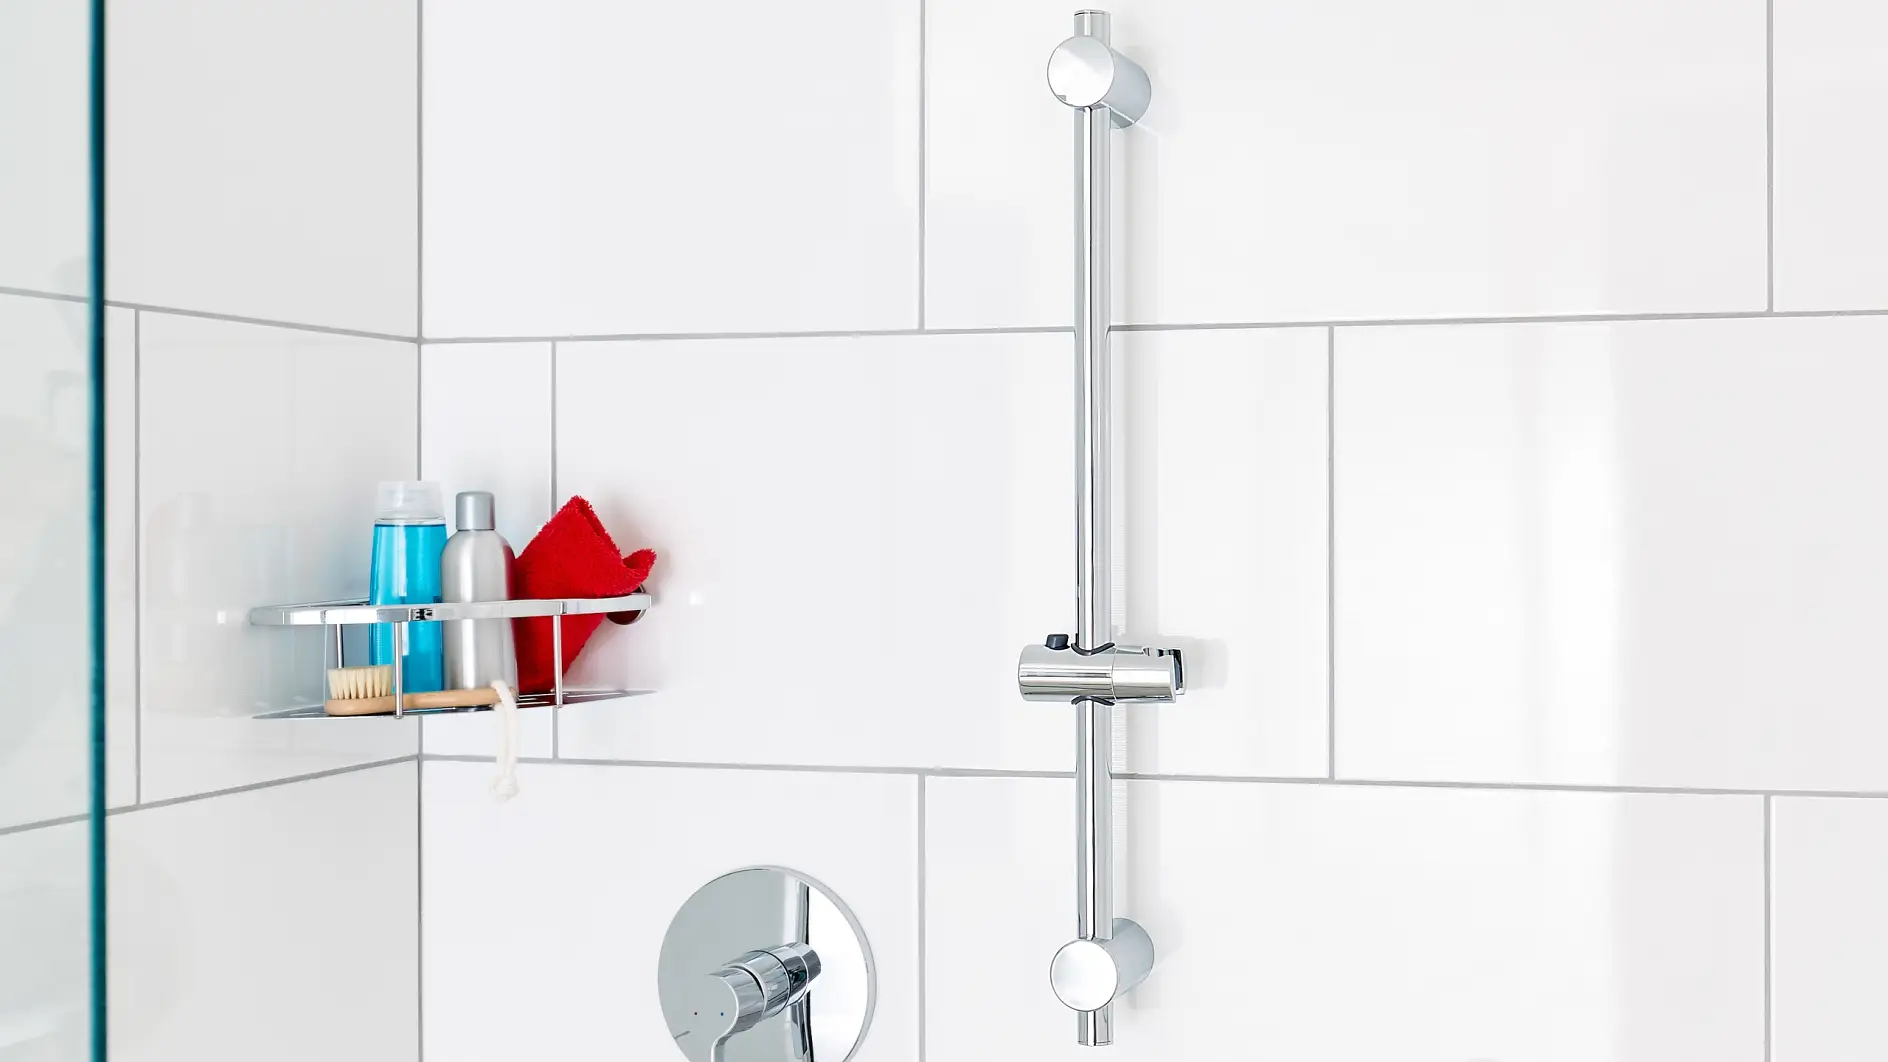 Keep your hands free during a shower session and provide perfect hold for your shower head.